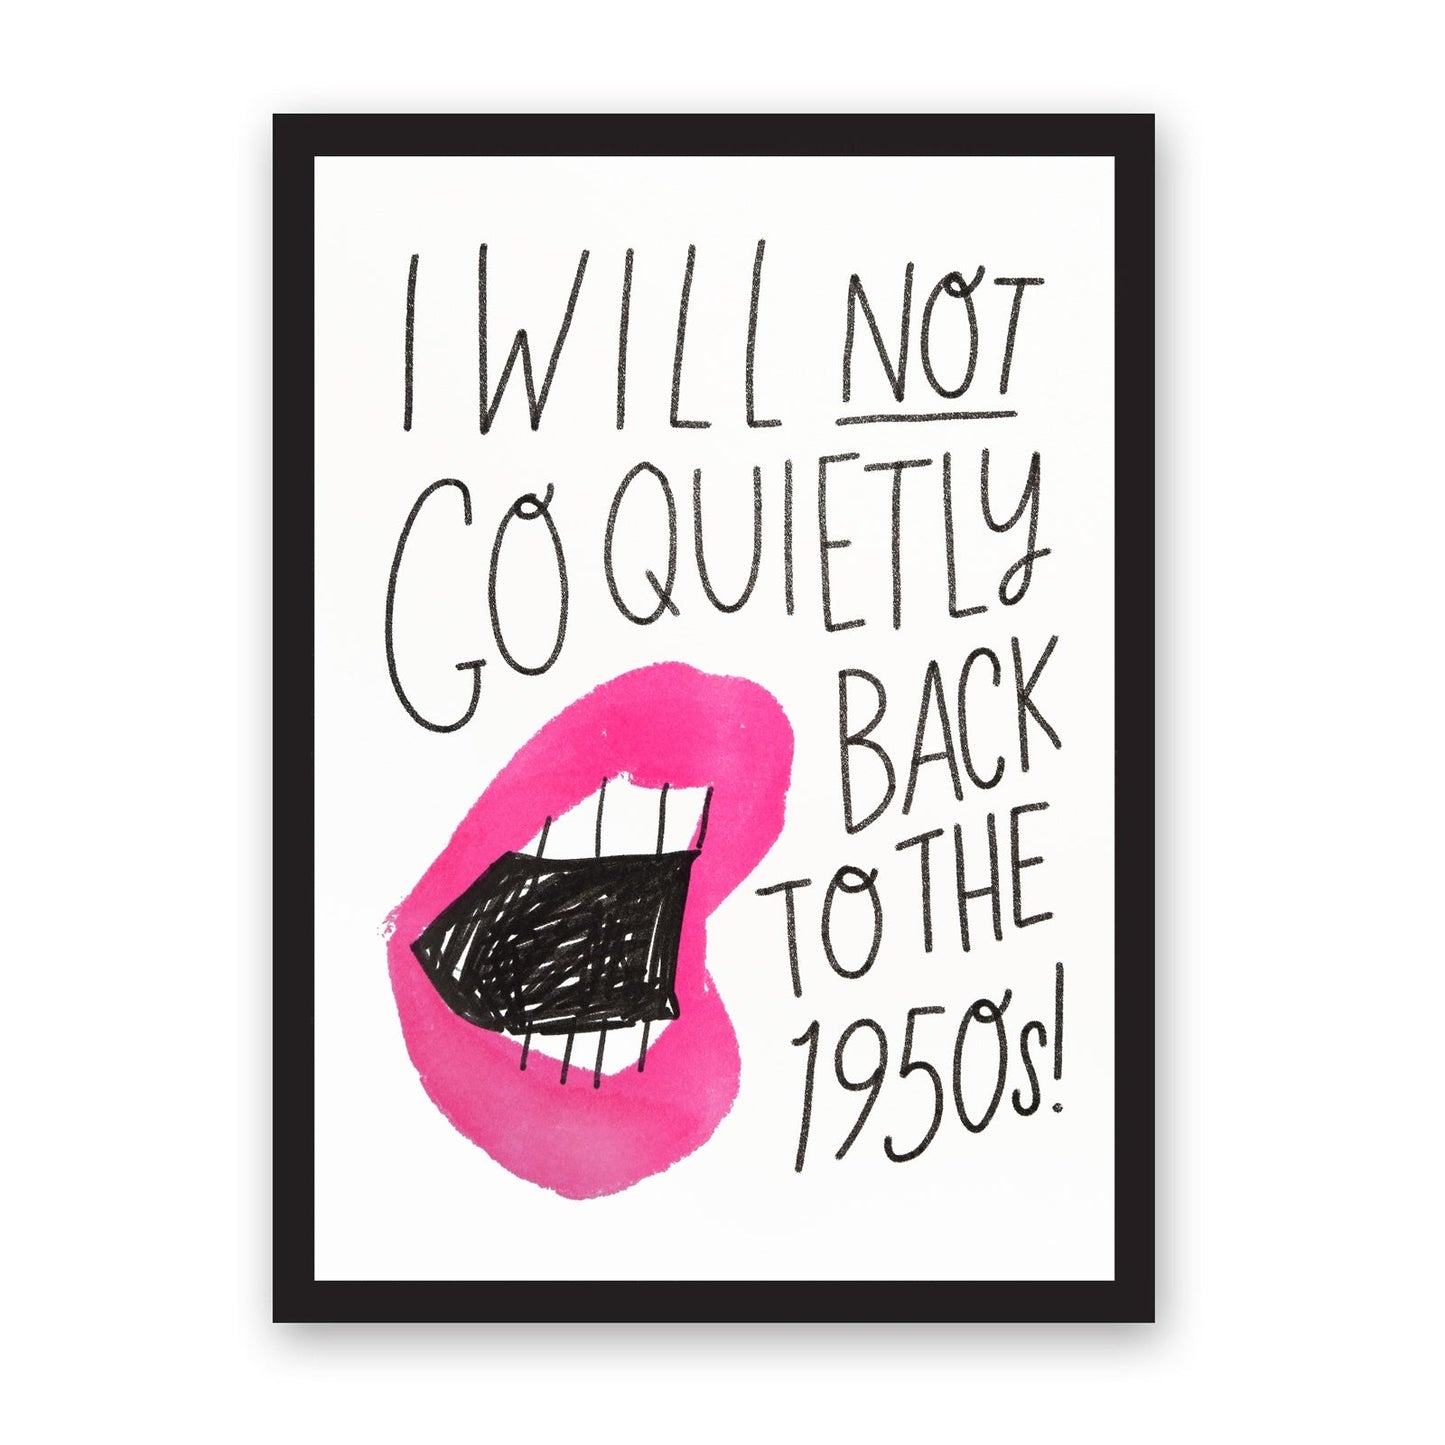 Print I will NOT go quietly back to the 1950s!, A3